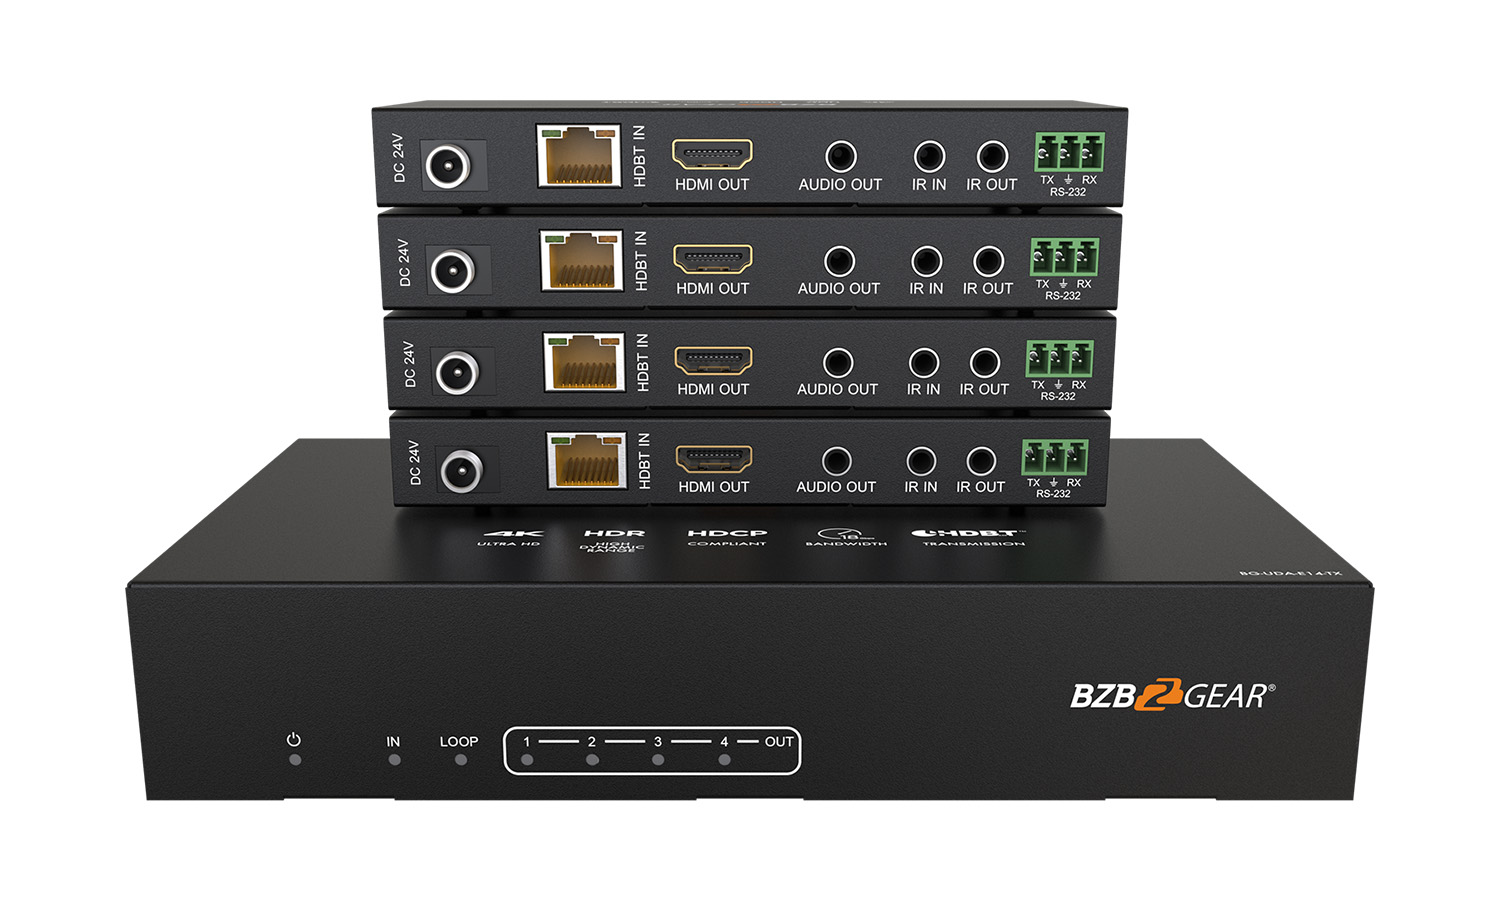 BG-UDA-E14 1X4 4K UHD 18Gbps HDMI HDBaseT Splitter/Distribution Amplifier over Category Cable by BZBGEAR